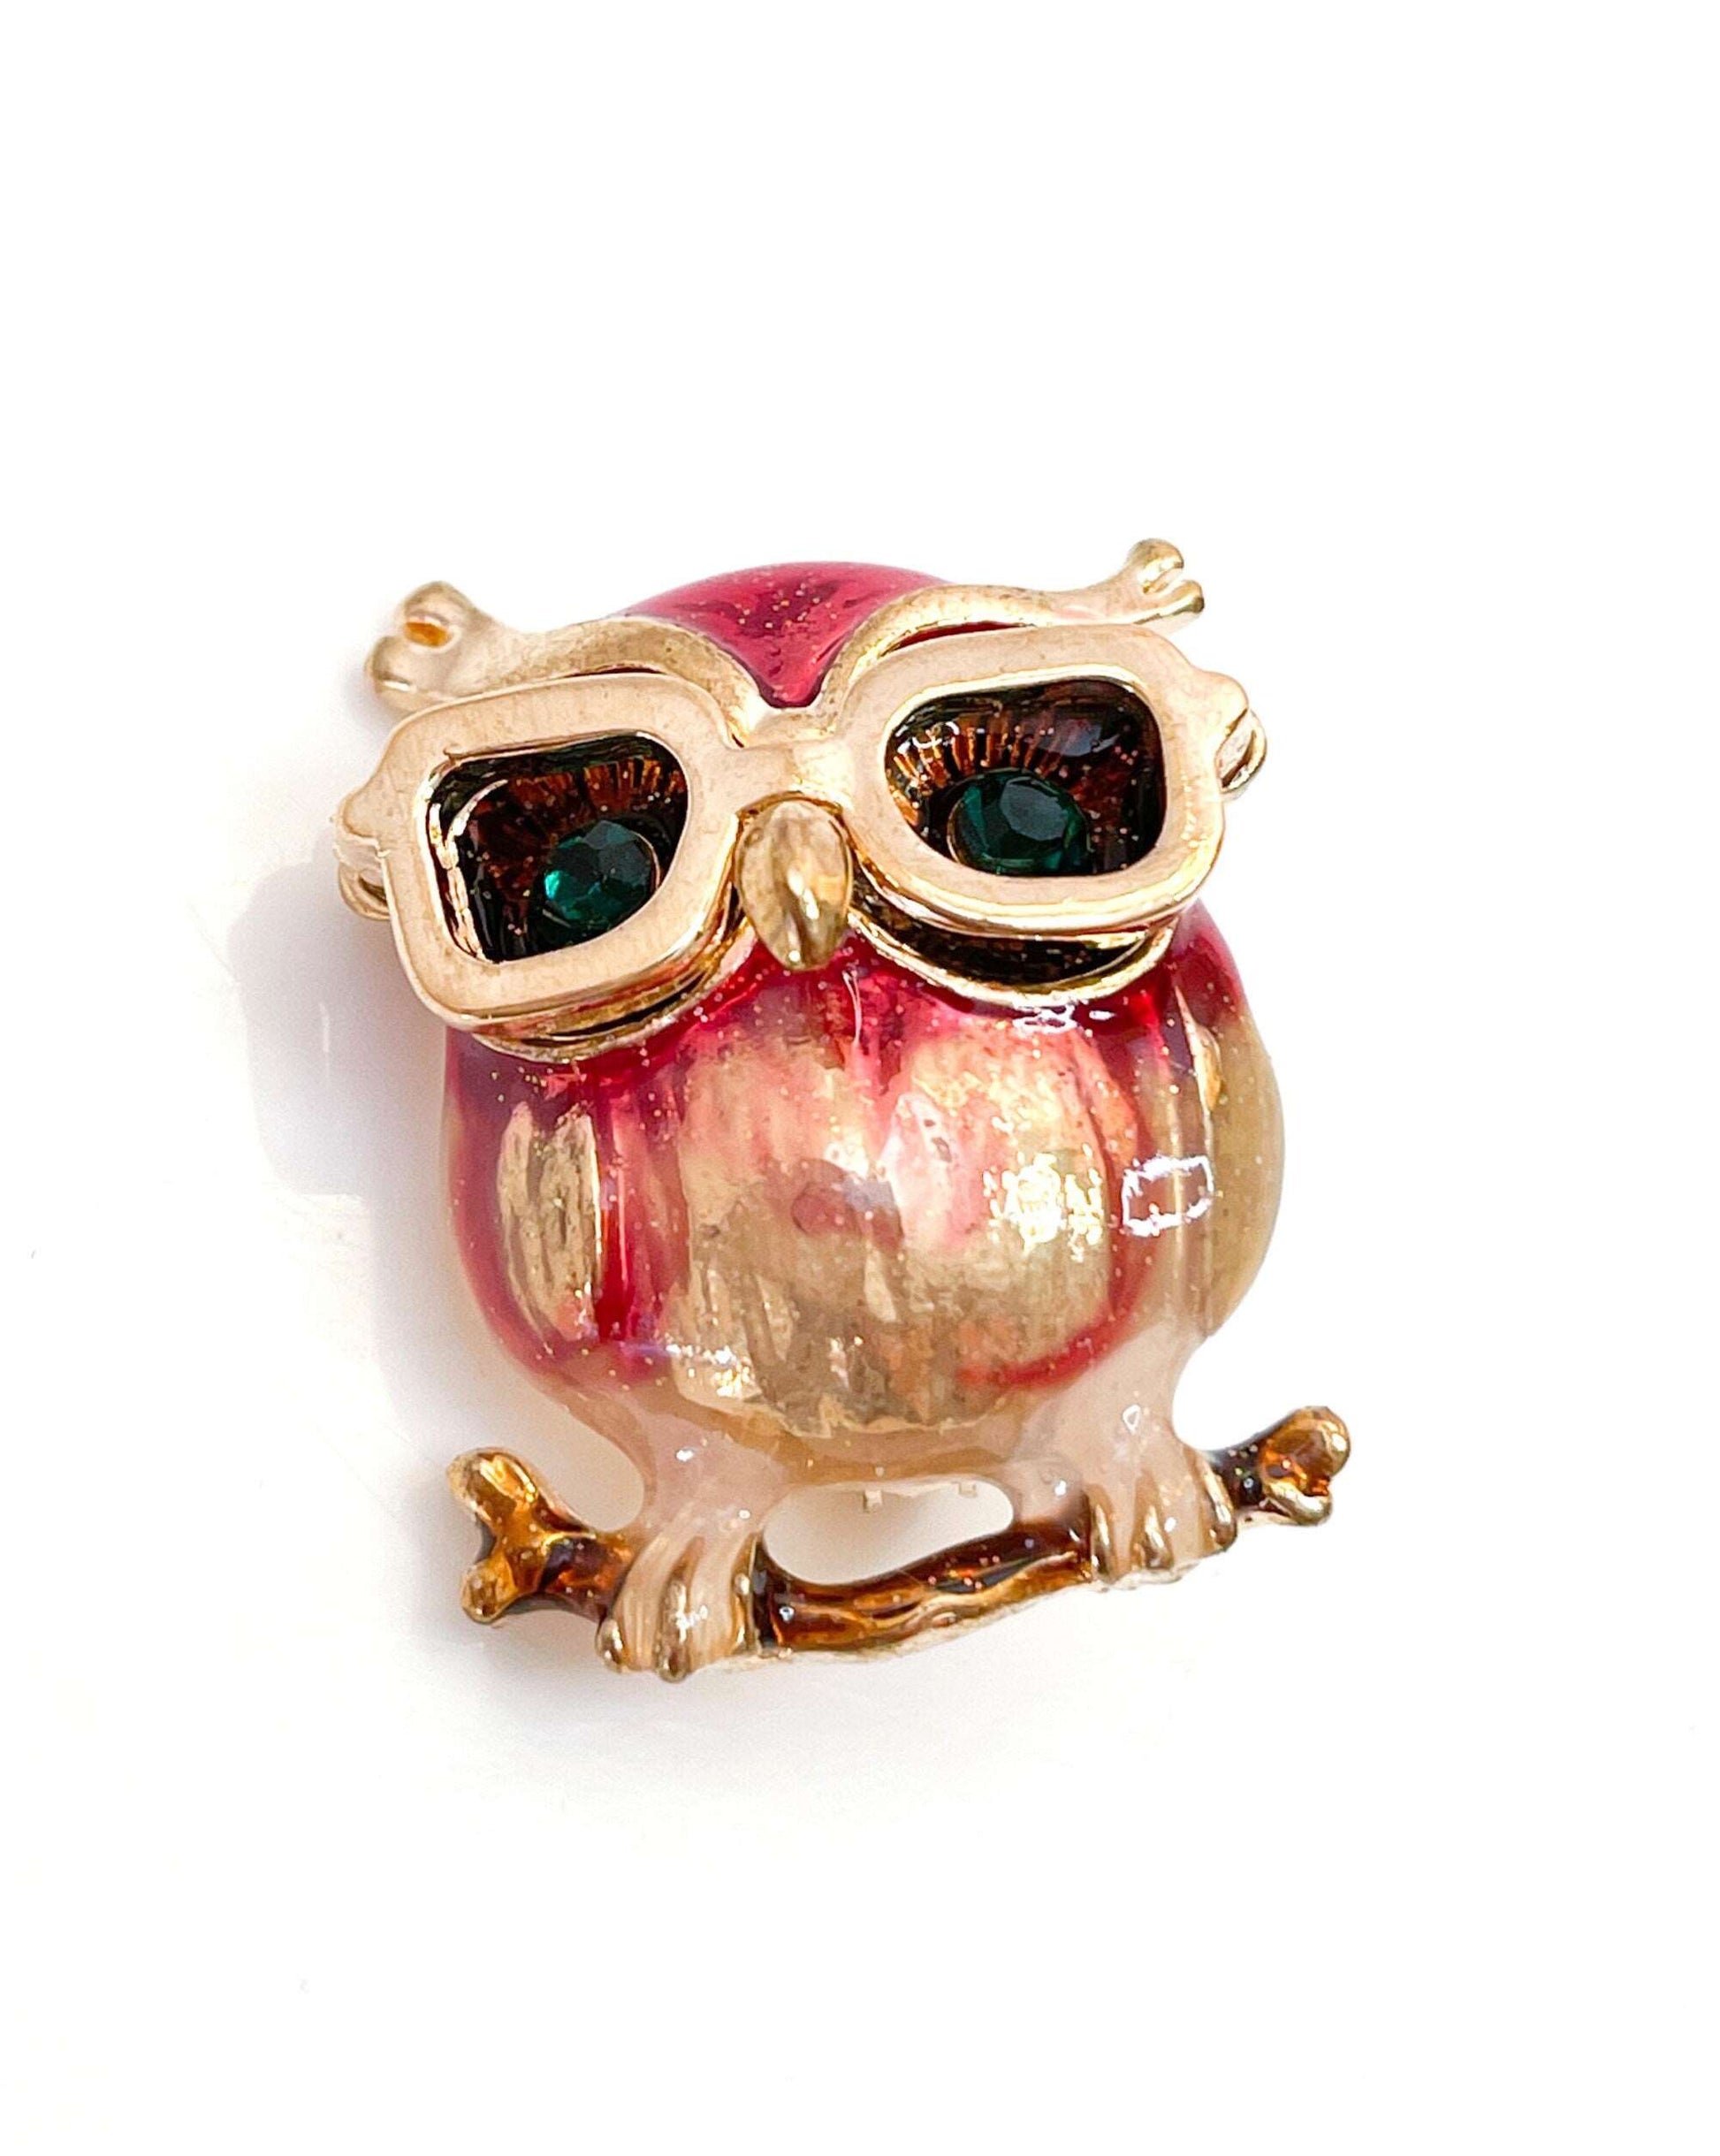 Funky Vintage Style Owl Brooch, Rhinestone Crystal Pin, Owl With Glasses, Sparkly Jacket Pin, Brooches For Women